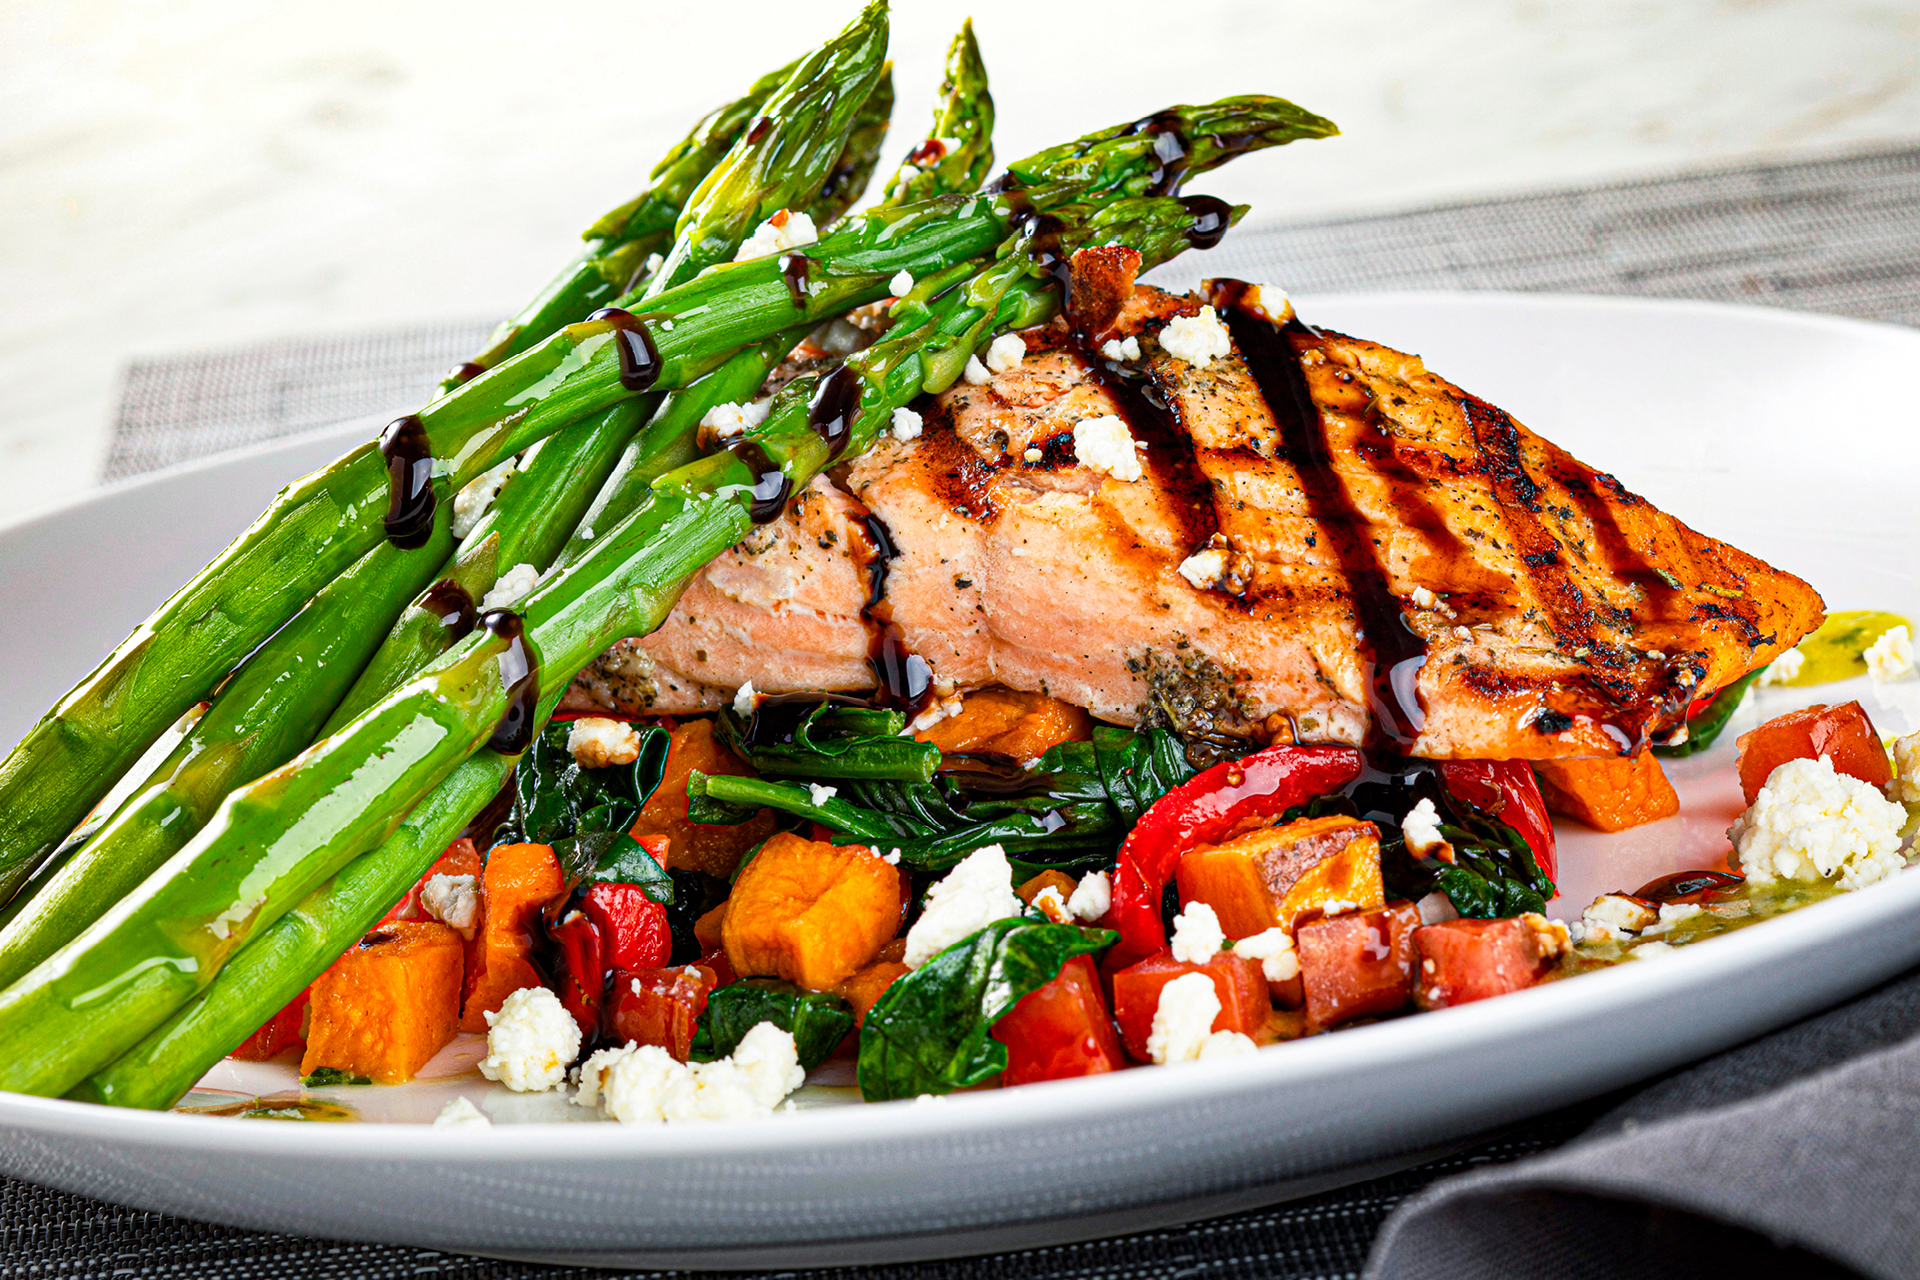 Grilled salmon with asparagus on a bed of vegetables